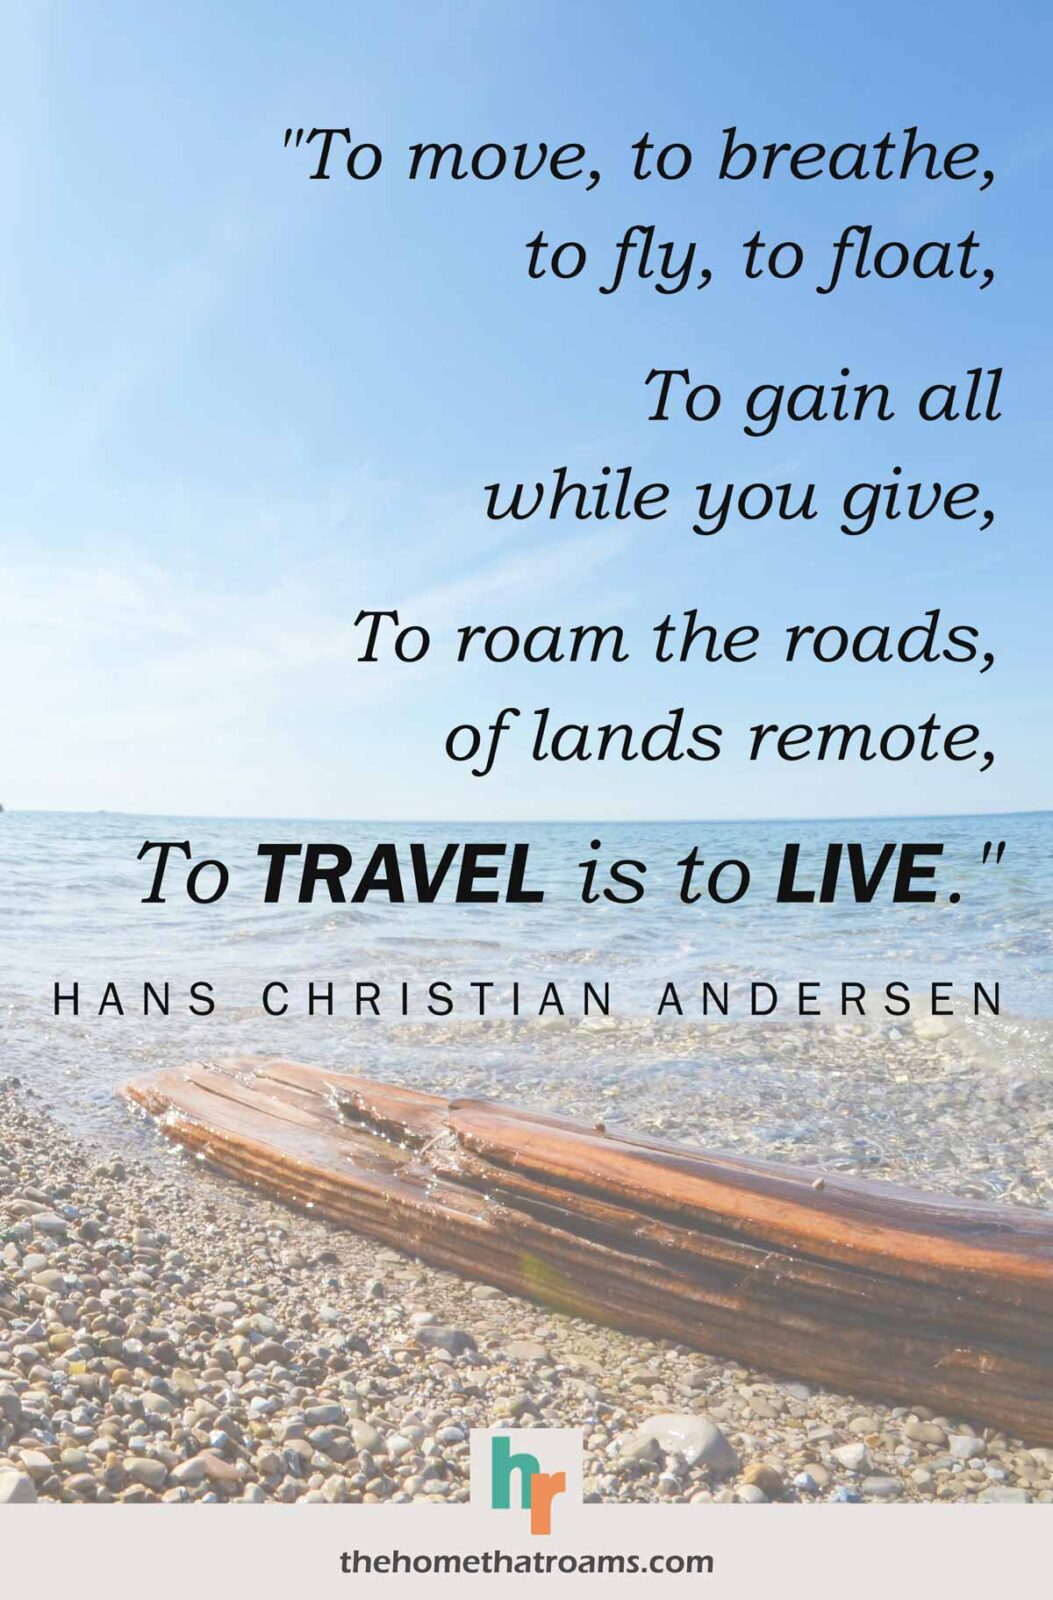 Adventure novel quote, “To move, to breathe, to fly, to float - To gain all while you give - To roam the roads, of lands remote - To travel is to live.” - Hans Christian Andersen, written over clear blue water calmly lapping a pebble beach and driftwood